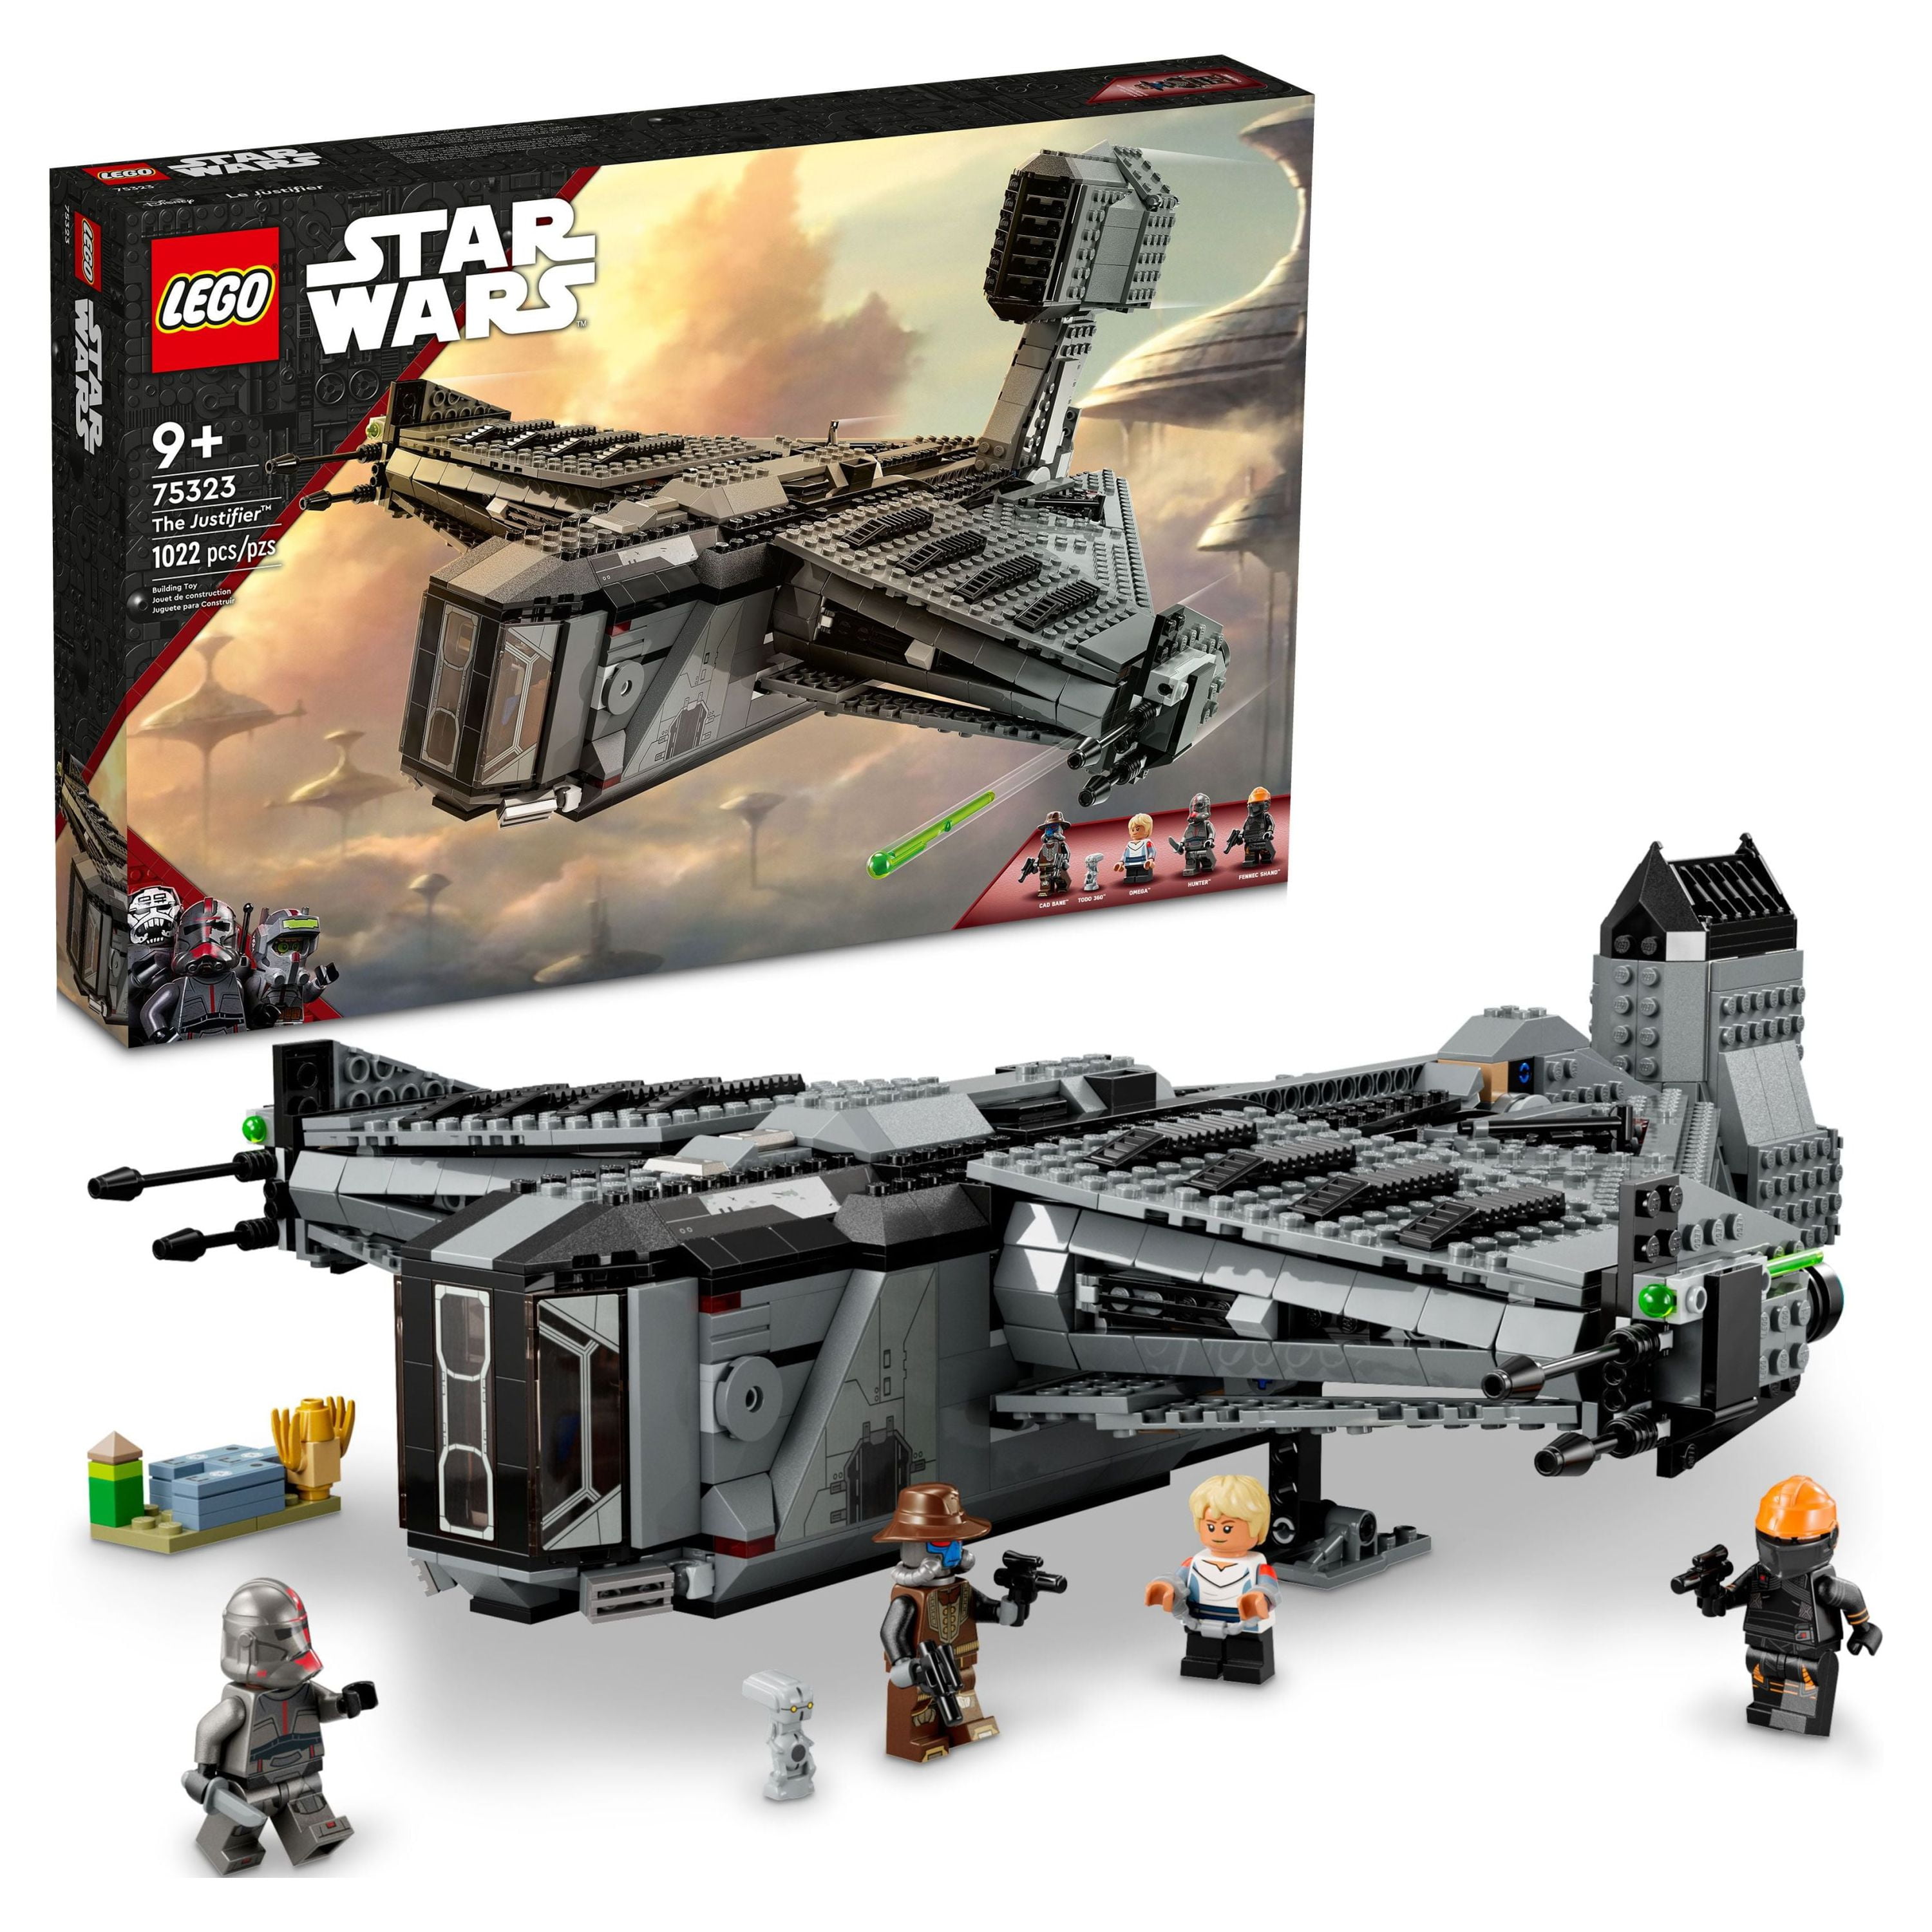 LEGO Star Wars the Justifier 75323, Buildable Starship with Cad Bane Minifigure 